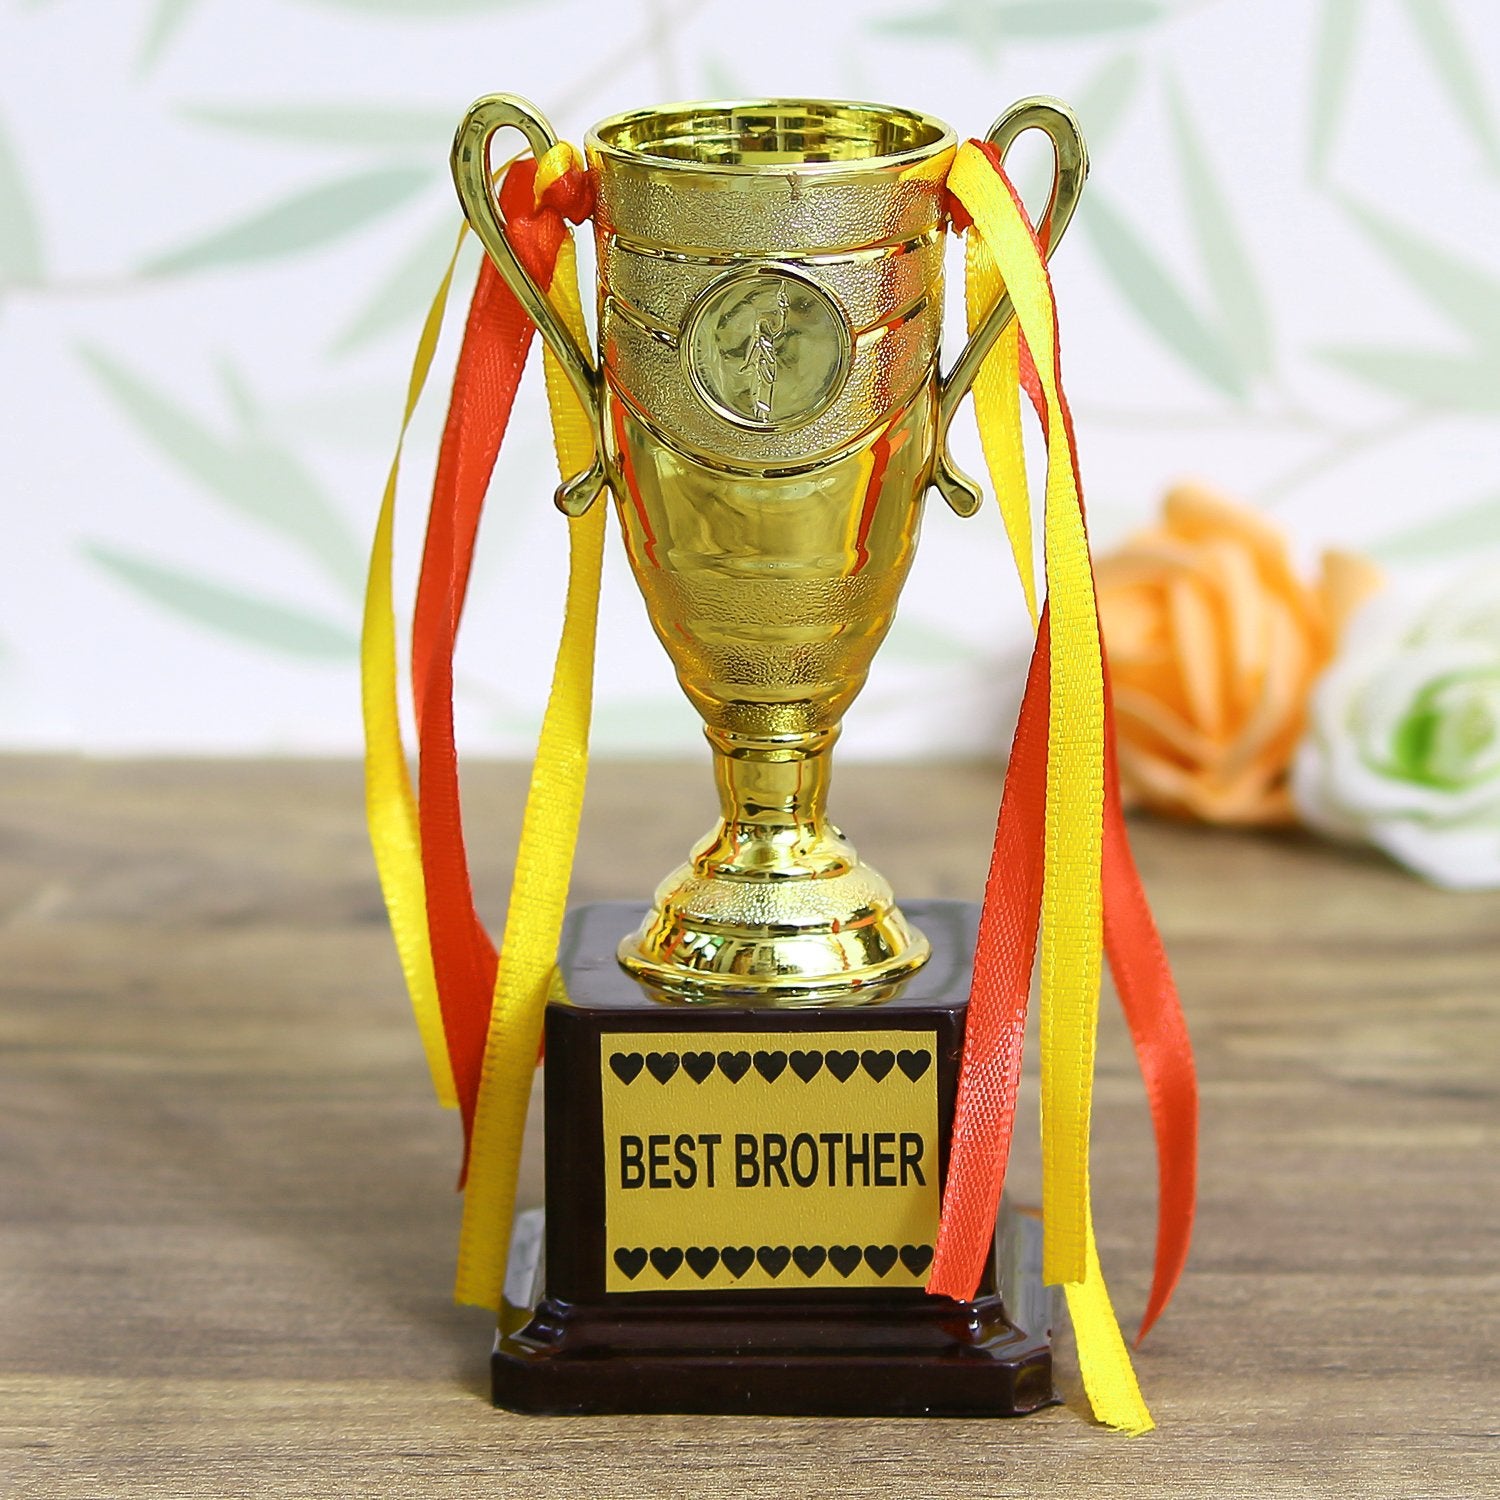 Designer Peacock Rakhi with Best Brother Trophy and Roli Chawal Pack 3